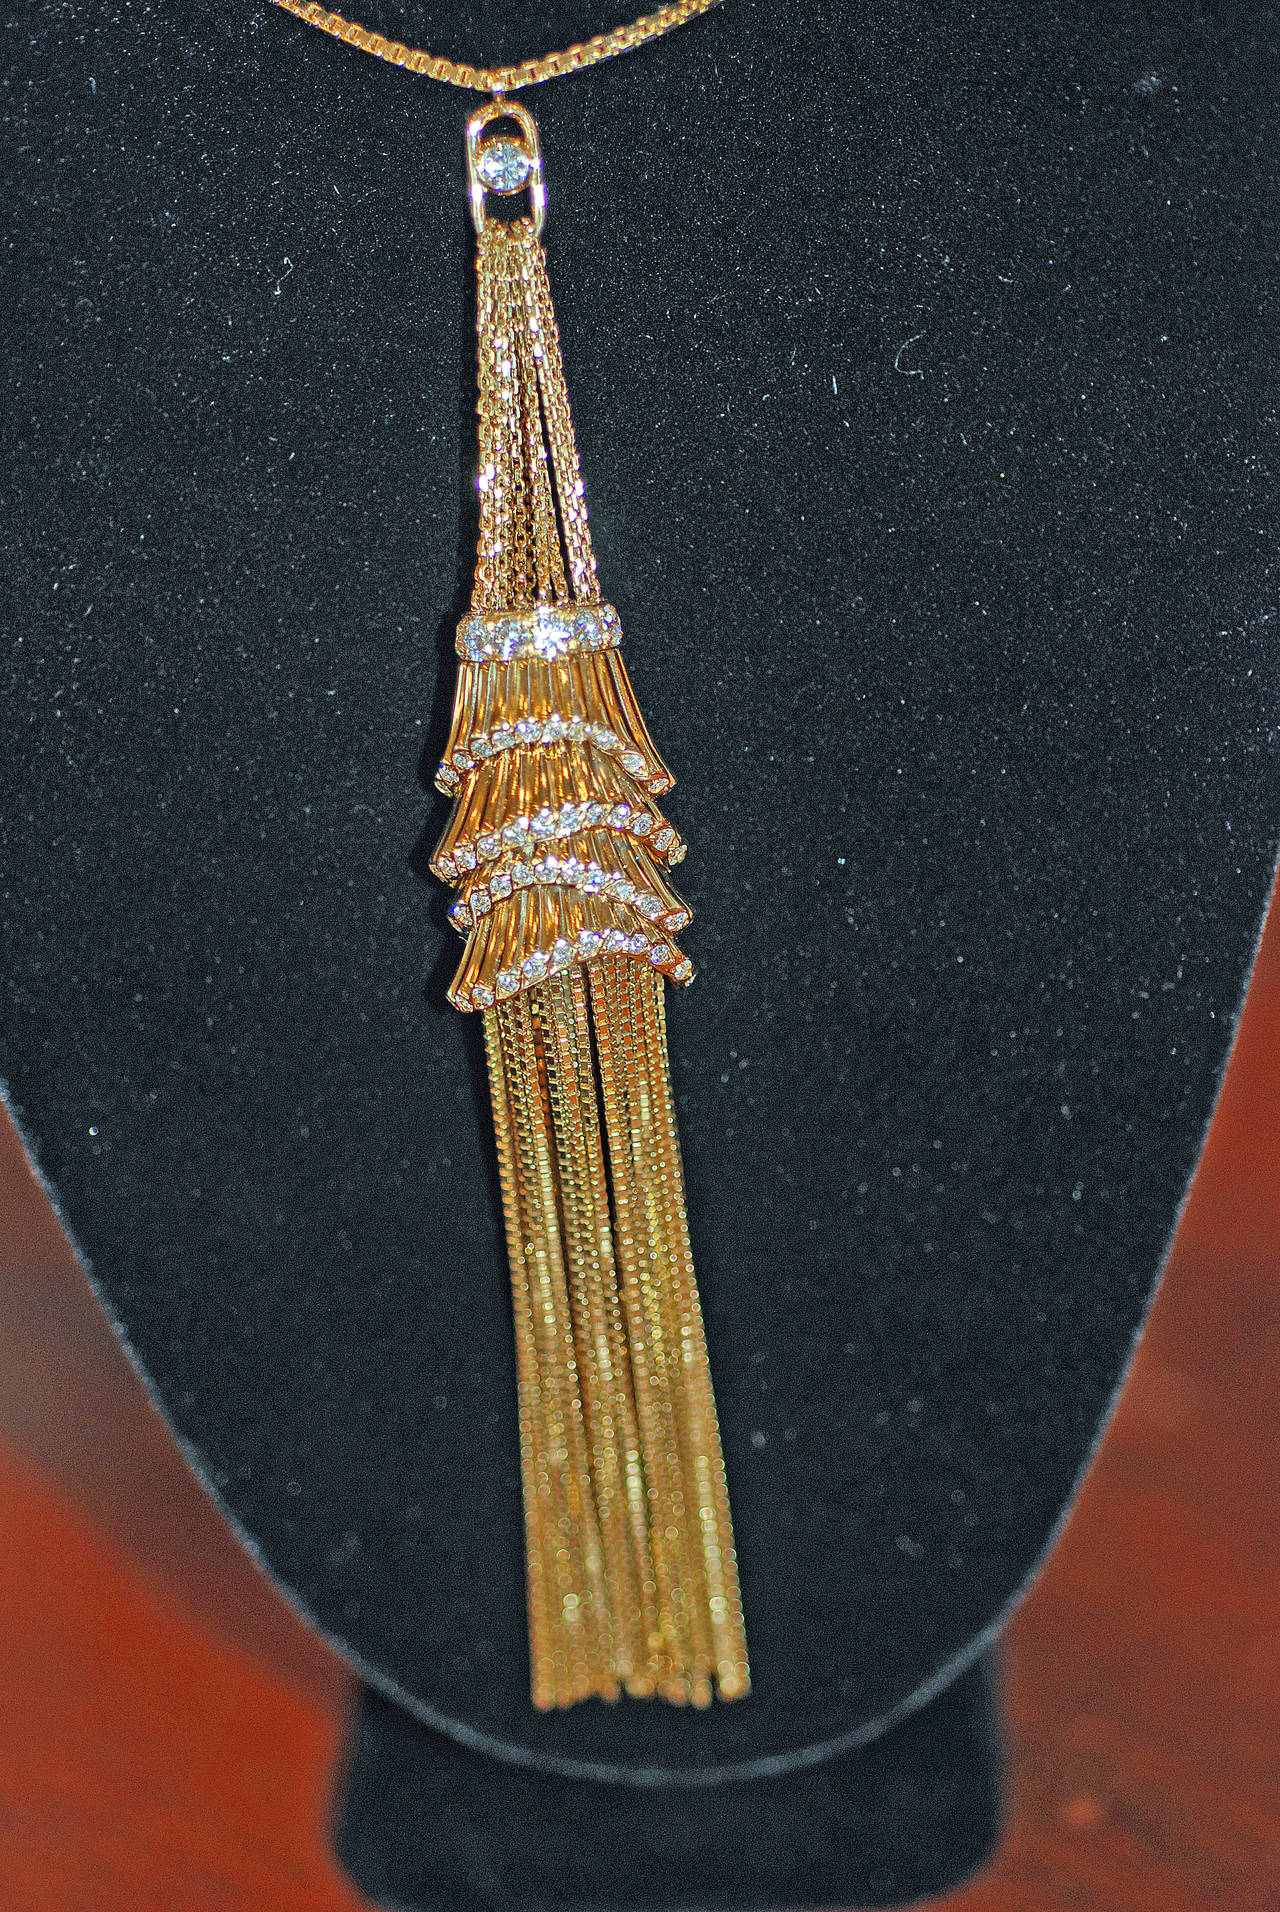 Exquisite 18k Gold and Diamond Boucheron Tassel from the Frou Frou Collection
Tassel measures 5